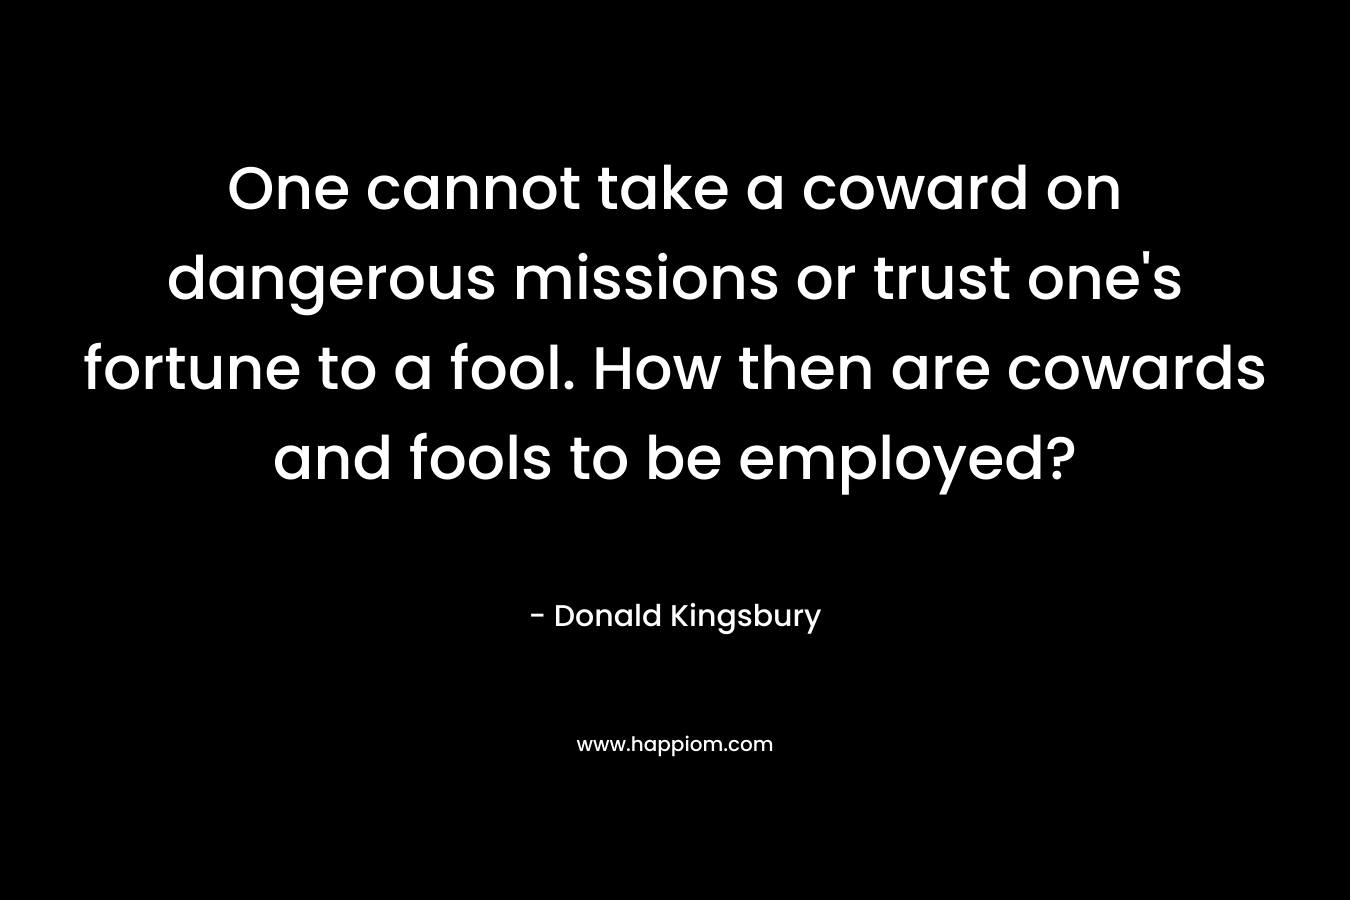 One cannot take a coward on dangerous missions or trust one’s fortune to a fool. How then are cowards and fools to be employed? – Donald Kingsbury